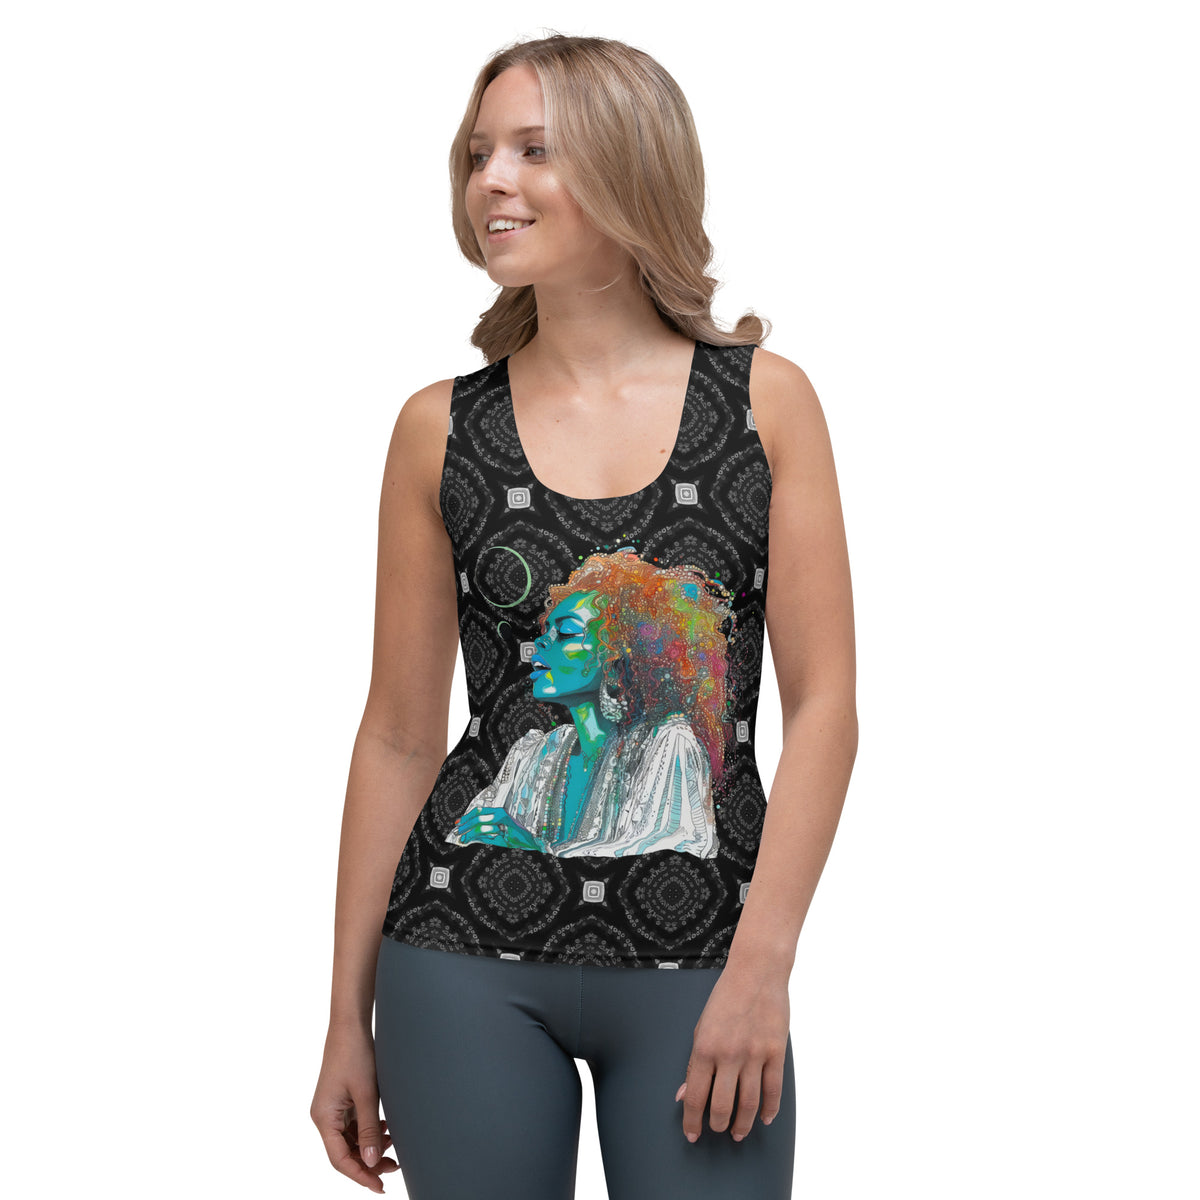 Model wearing Floral Fusion Women's Tank Top in a casual setting.